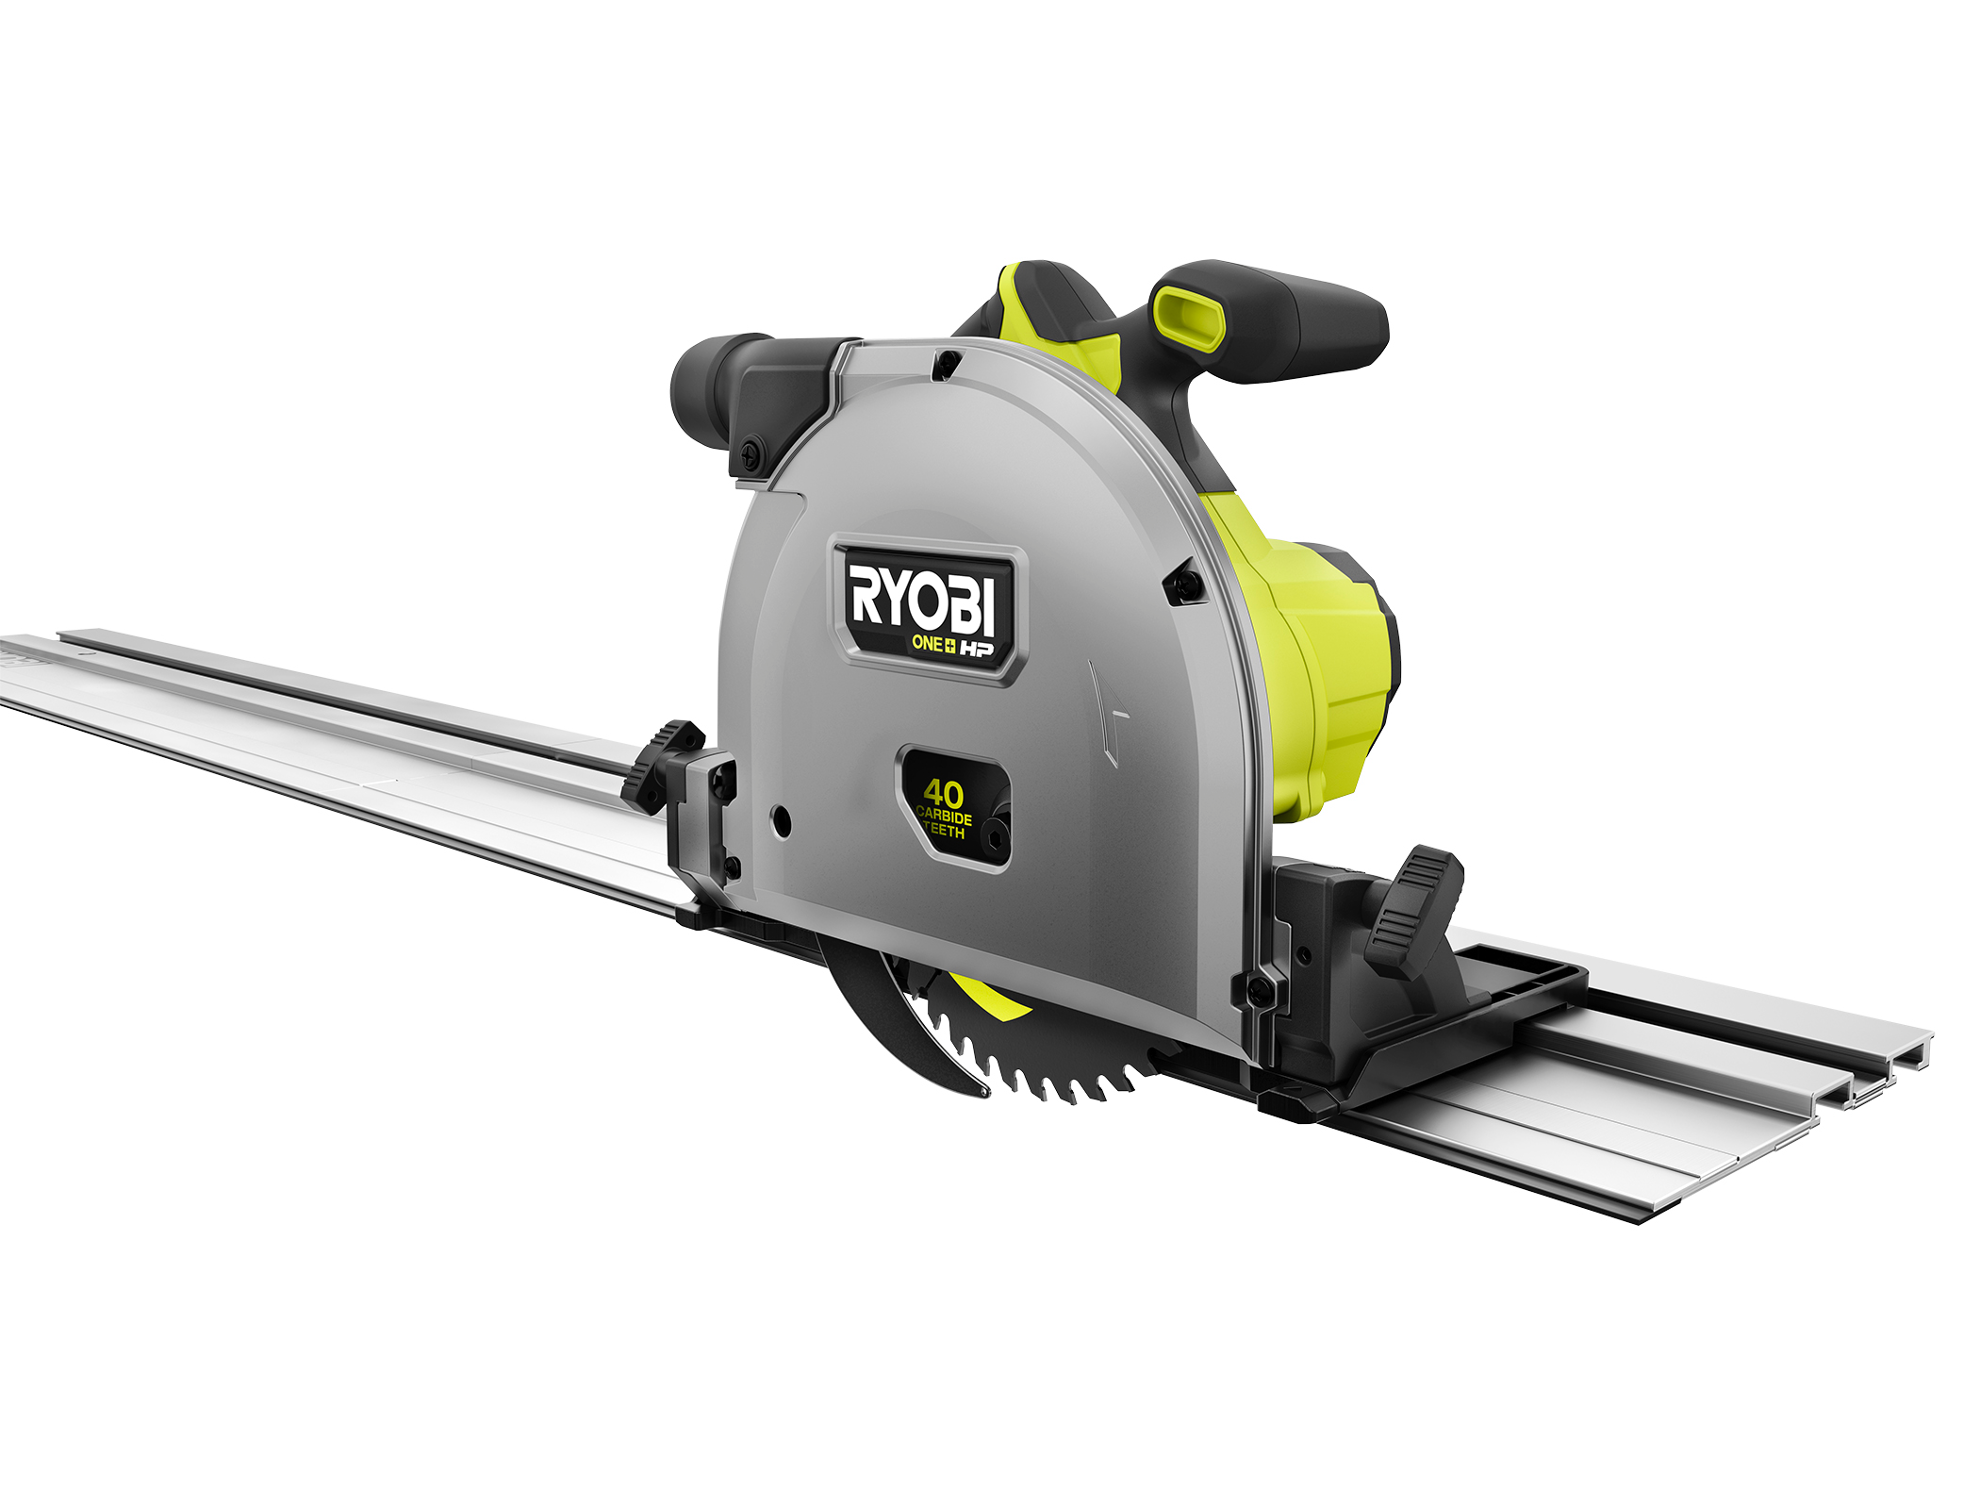 Compatible with the RYOBI 18V ONE+ HP Brushless 6-1/2” Track Saw (PTS01)